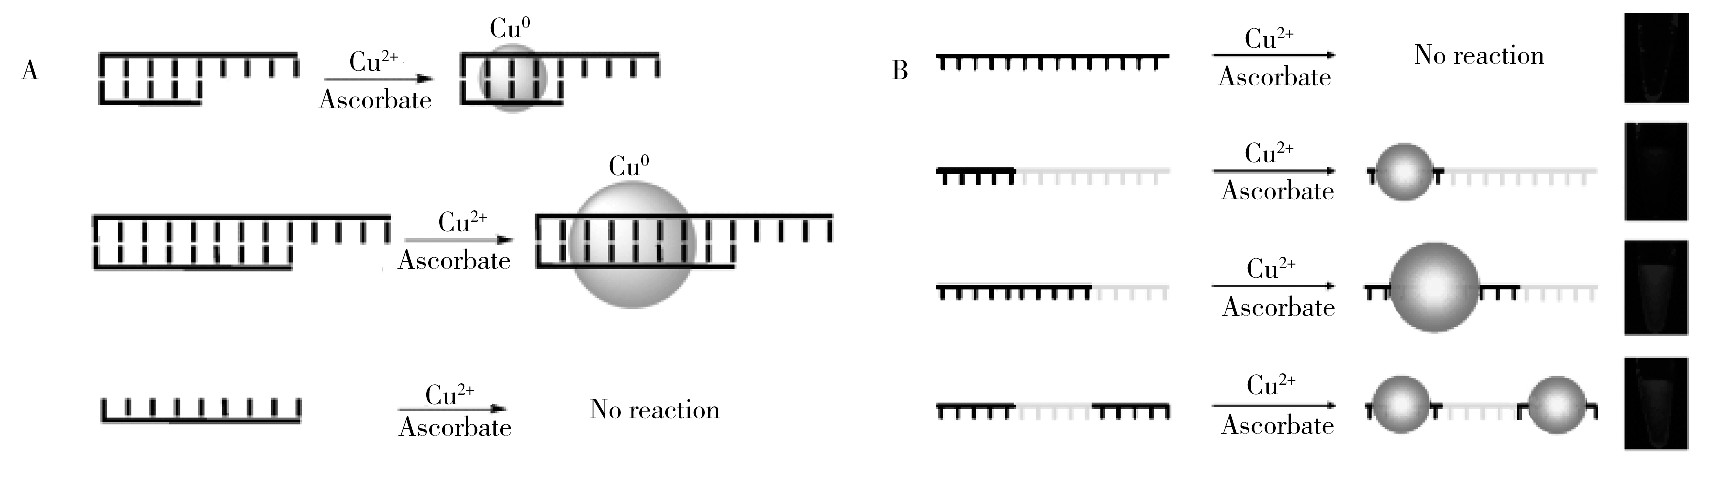 ͼ3 ˫DNA (A) [49]͵DNA (B) [50]鵼ϳӫͭ״ (Cu NCs) ʾͼFig.3 Schematic illustration of fluorescent Cu NCs templated by double-stranded DNA (A) [49]and single-stranded DNA (B) [50]